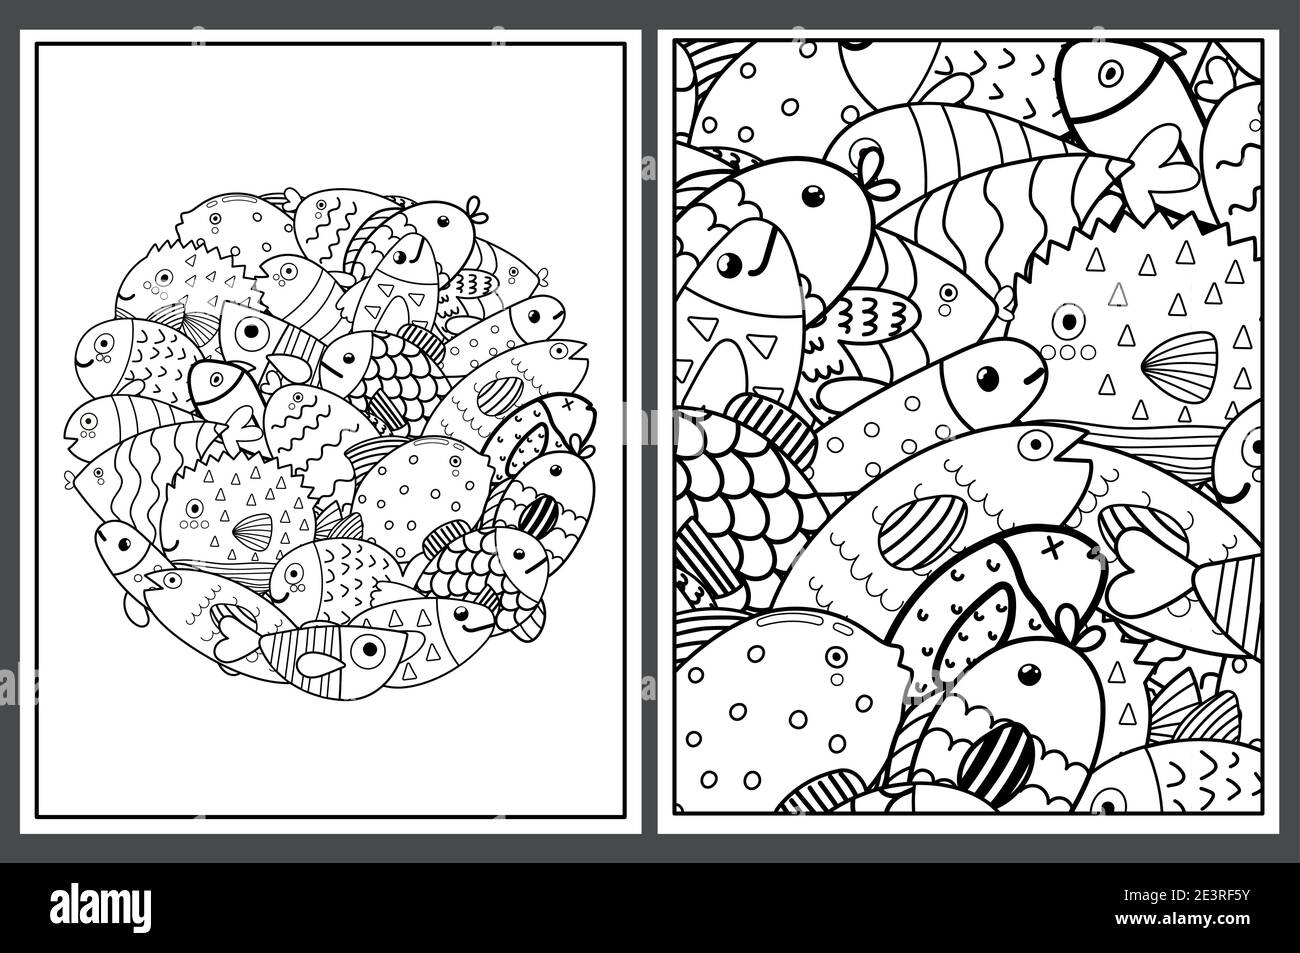 Coloring pages set with cute fish doodle sea animals templates for coloring book stock vector image art